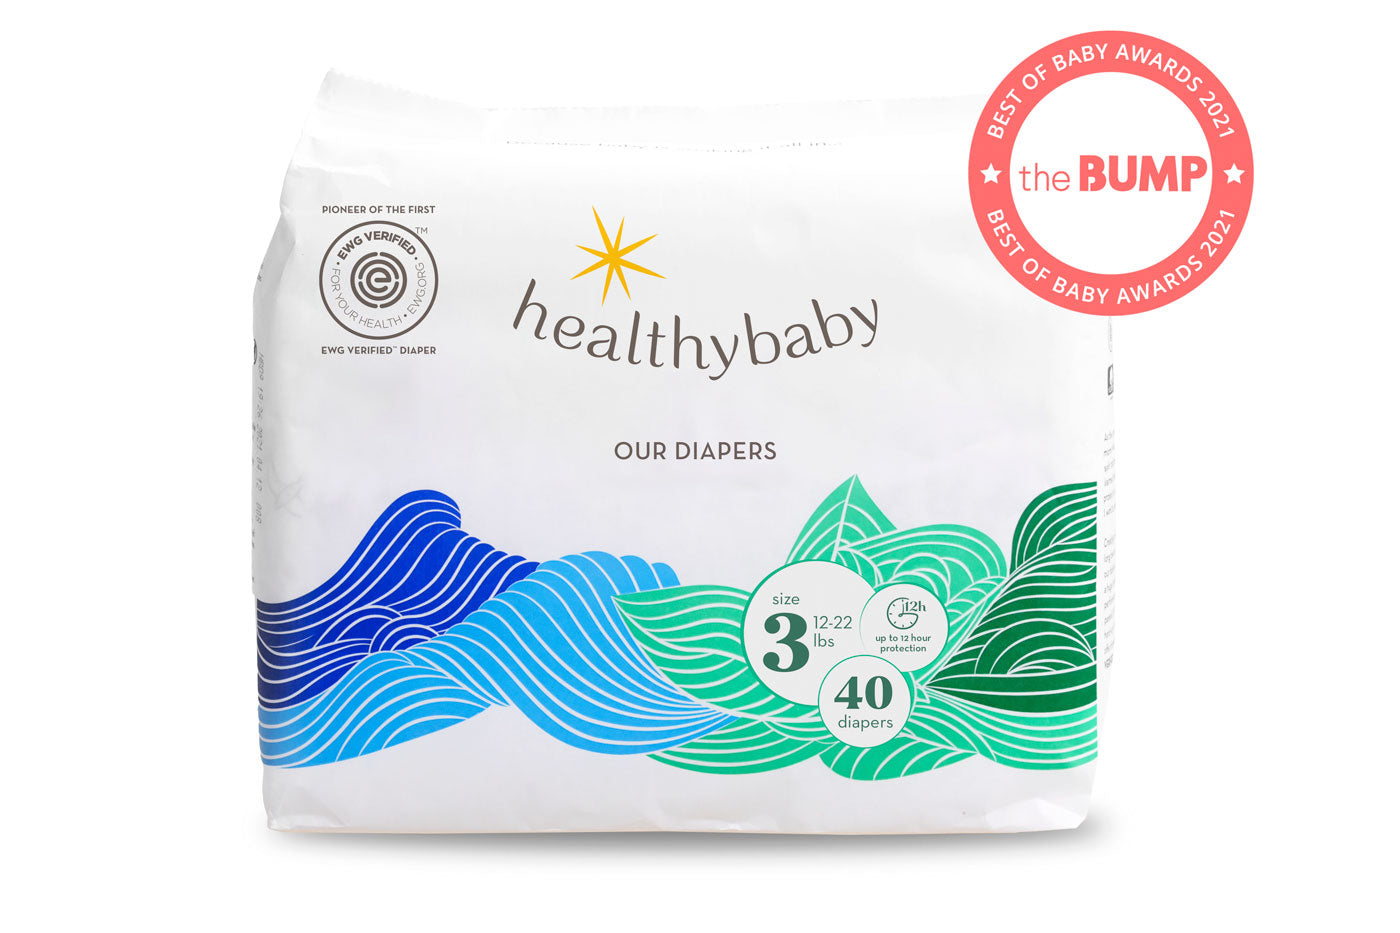 Healthybaby Disposable Plant-Based Baby Wipes 4 Pack (256 Wipes)